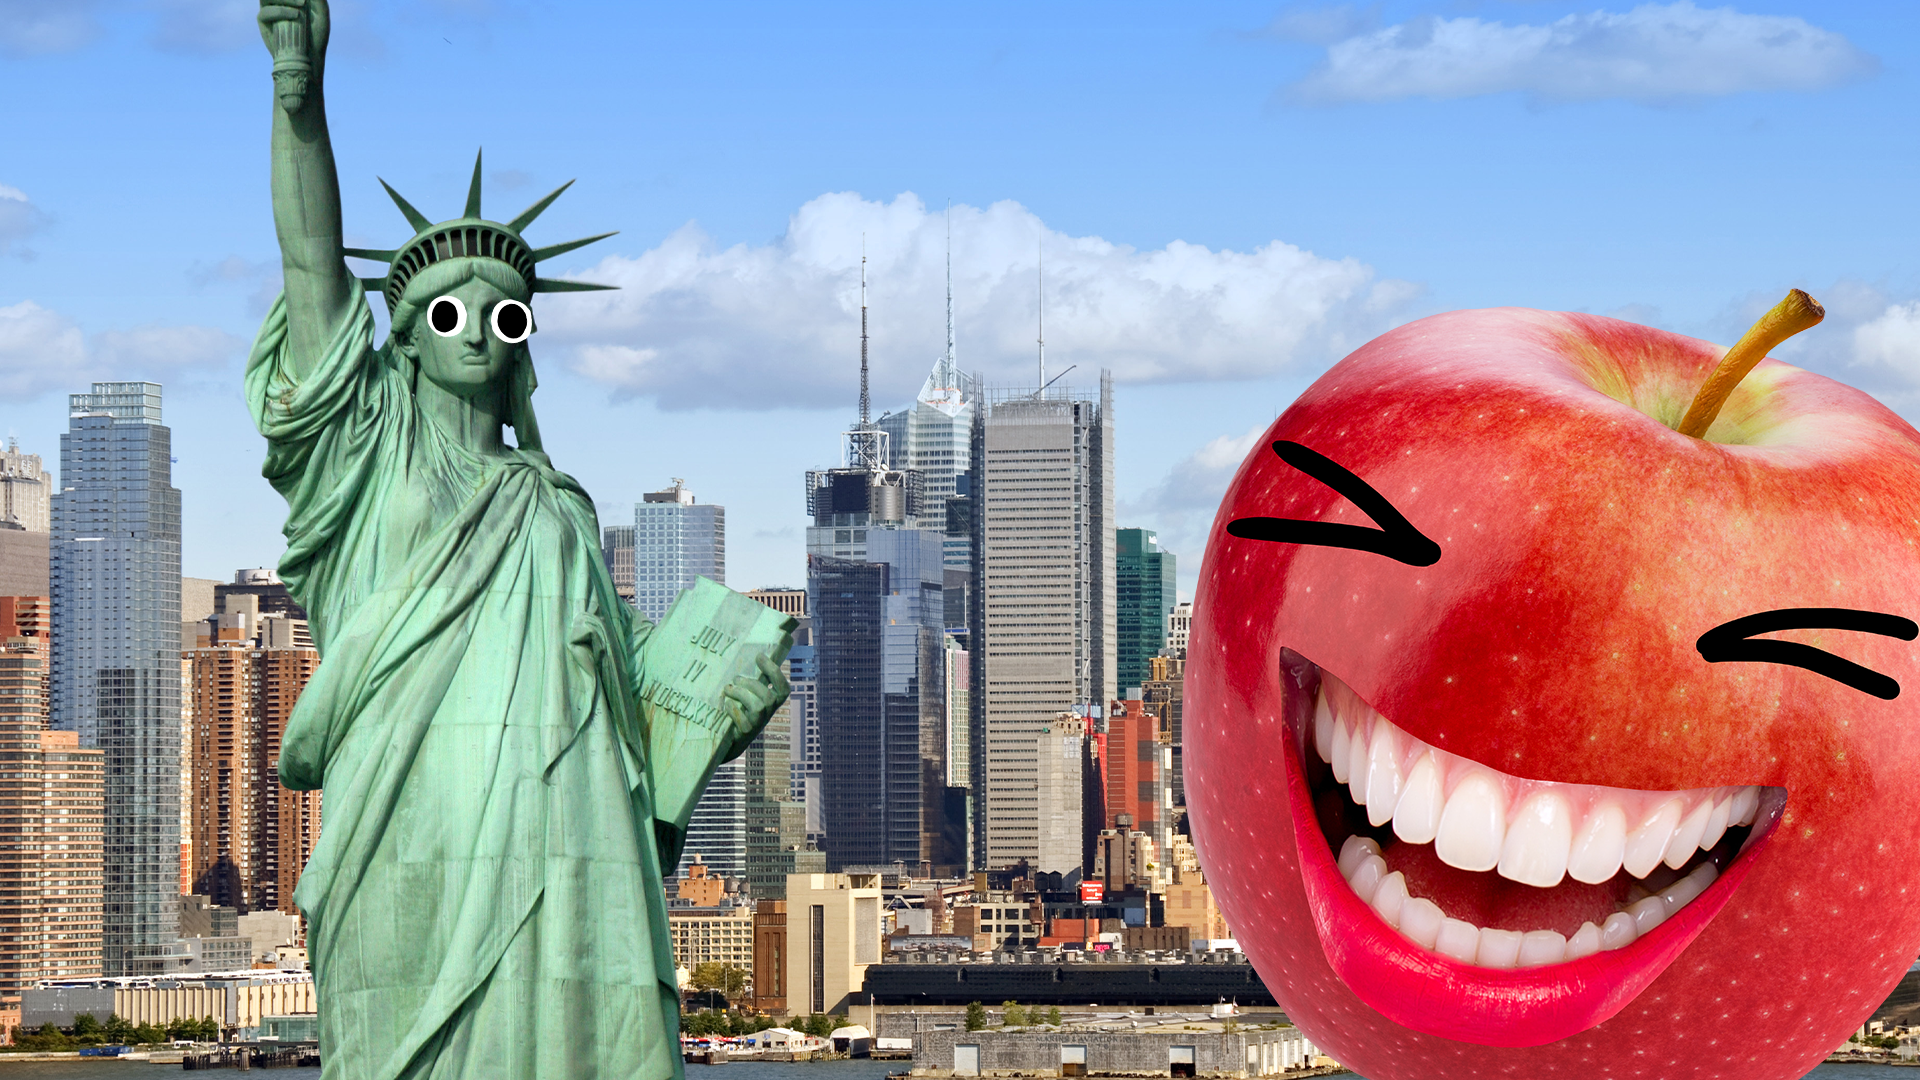 Laughing big apple in the Big Apple